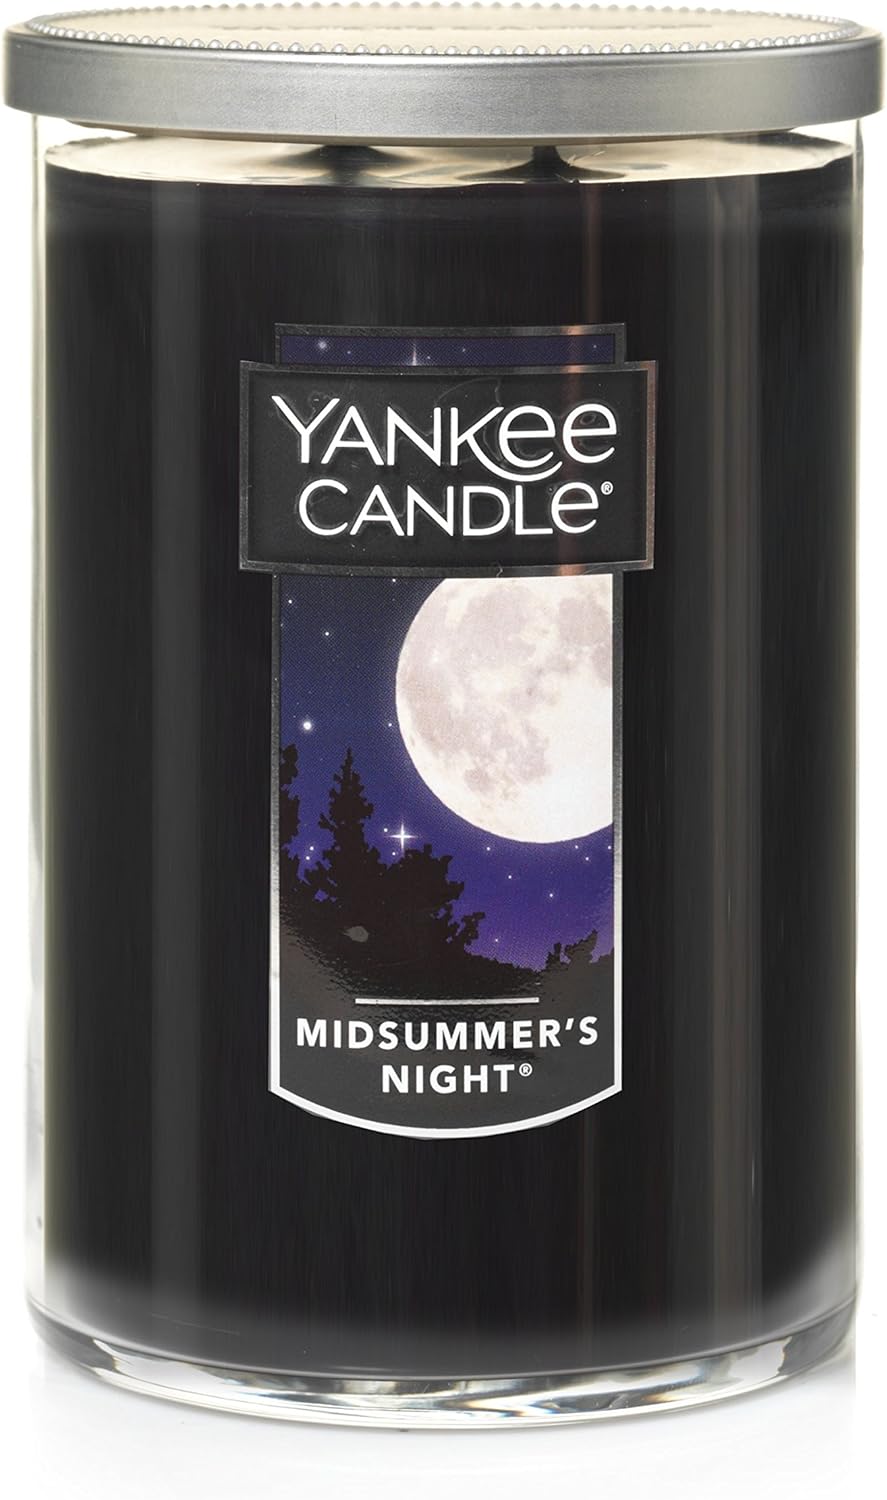 Yankee Candle MidSummer' Night Scented, Classic 22oz Large Tumbler 2-Wick Candle, Over 75 Hours of Burn Time